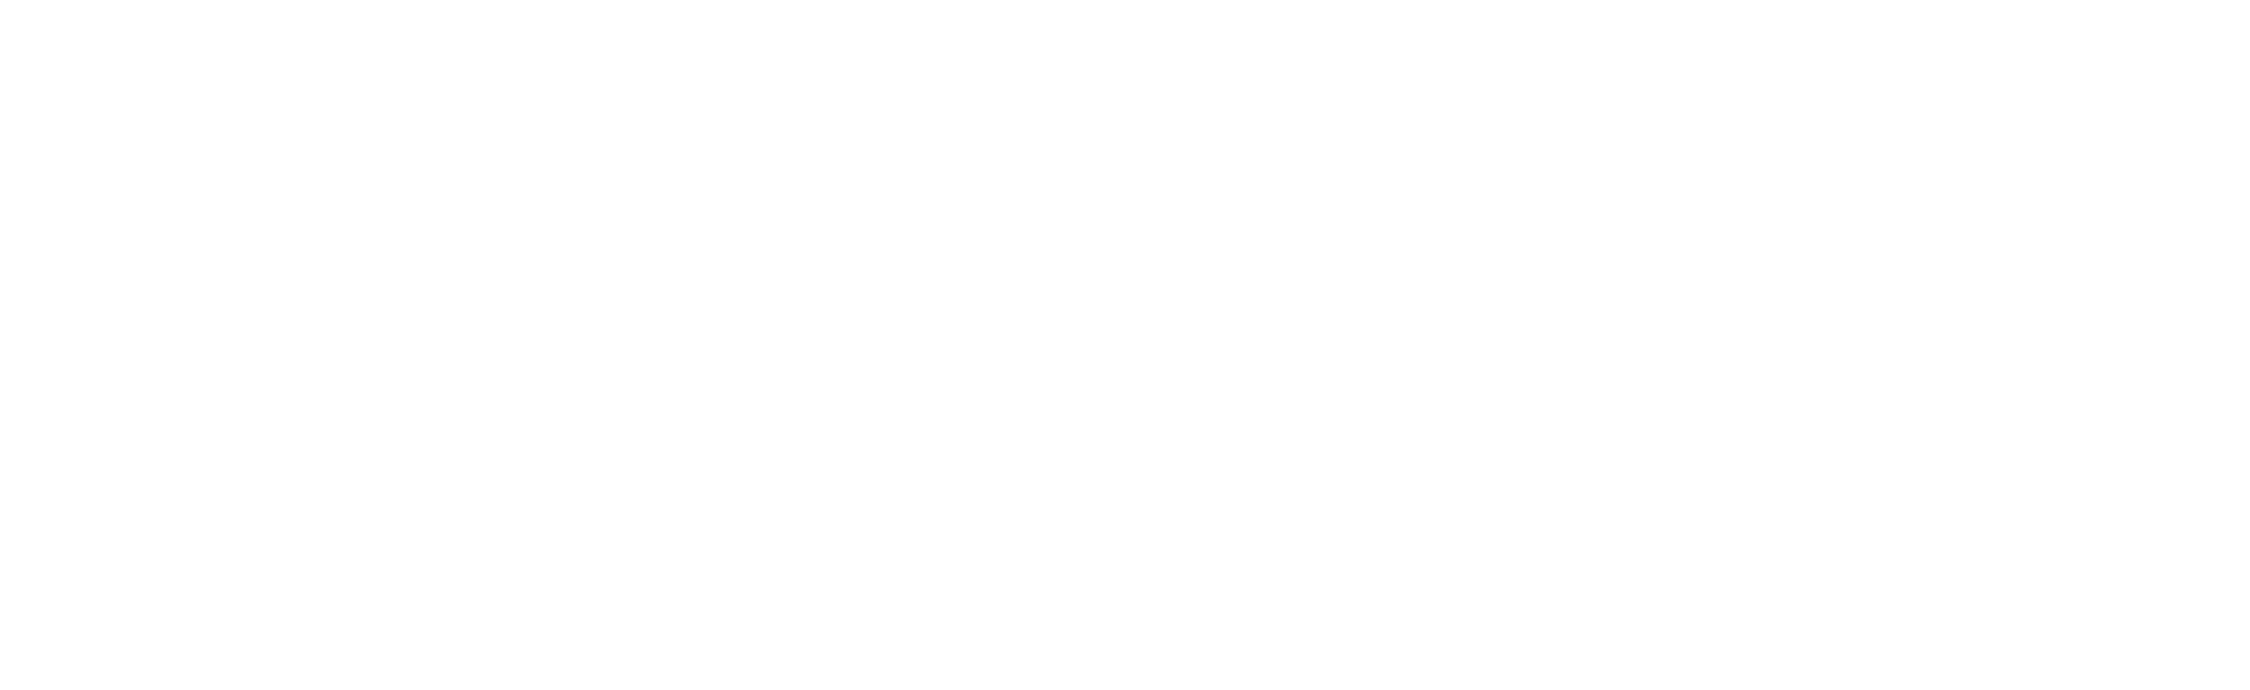 The Izaguirre Law Firm logo